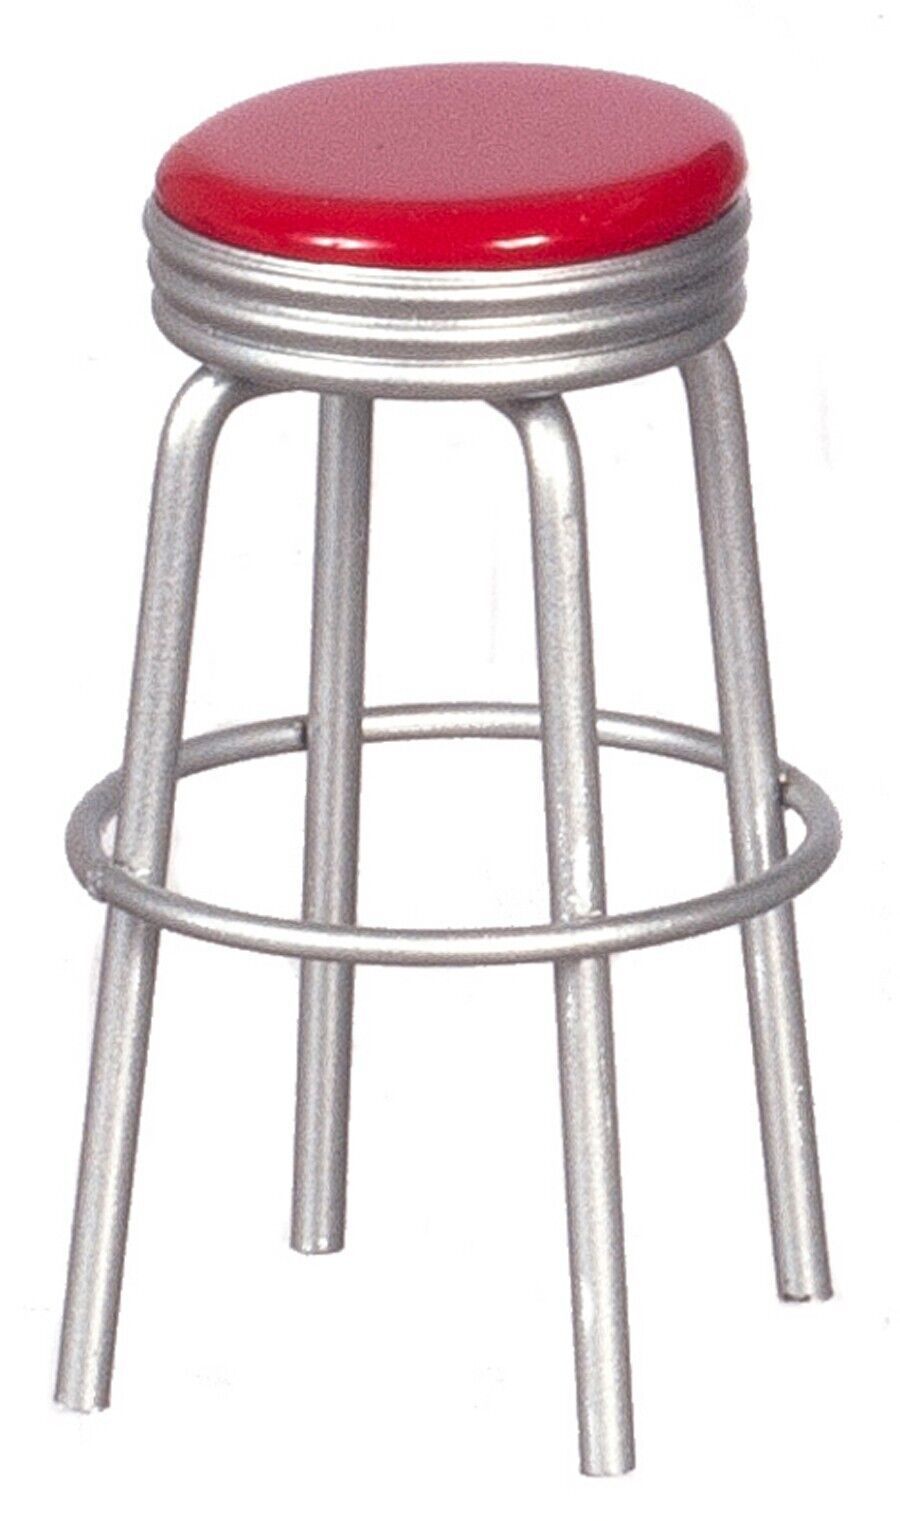 Dollhouse Miniature - 1950's Metal Stool Style Furniture - Red Top - $12.99